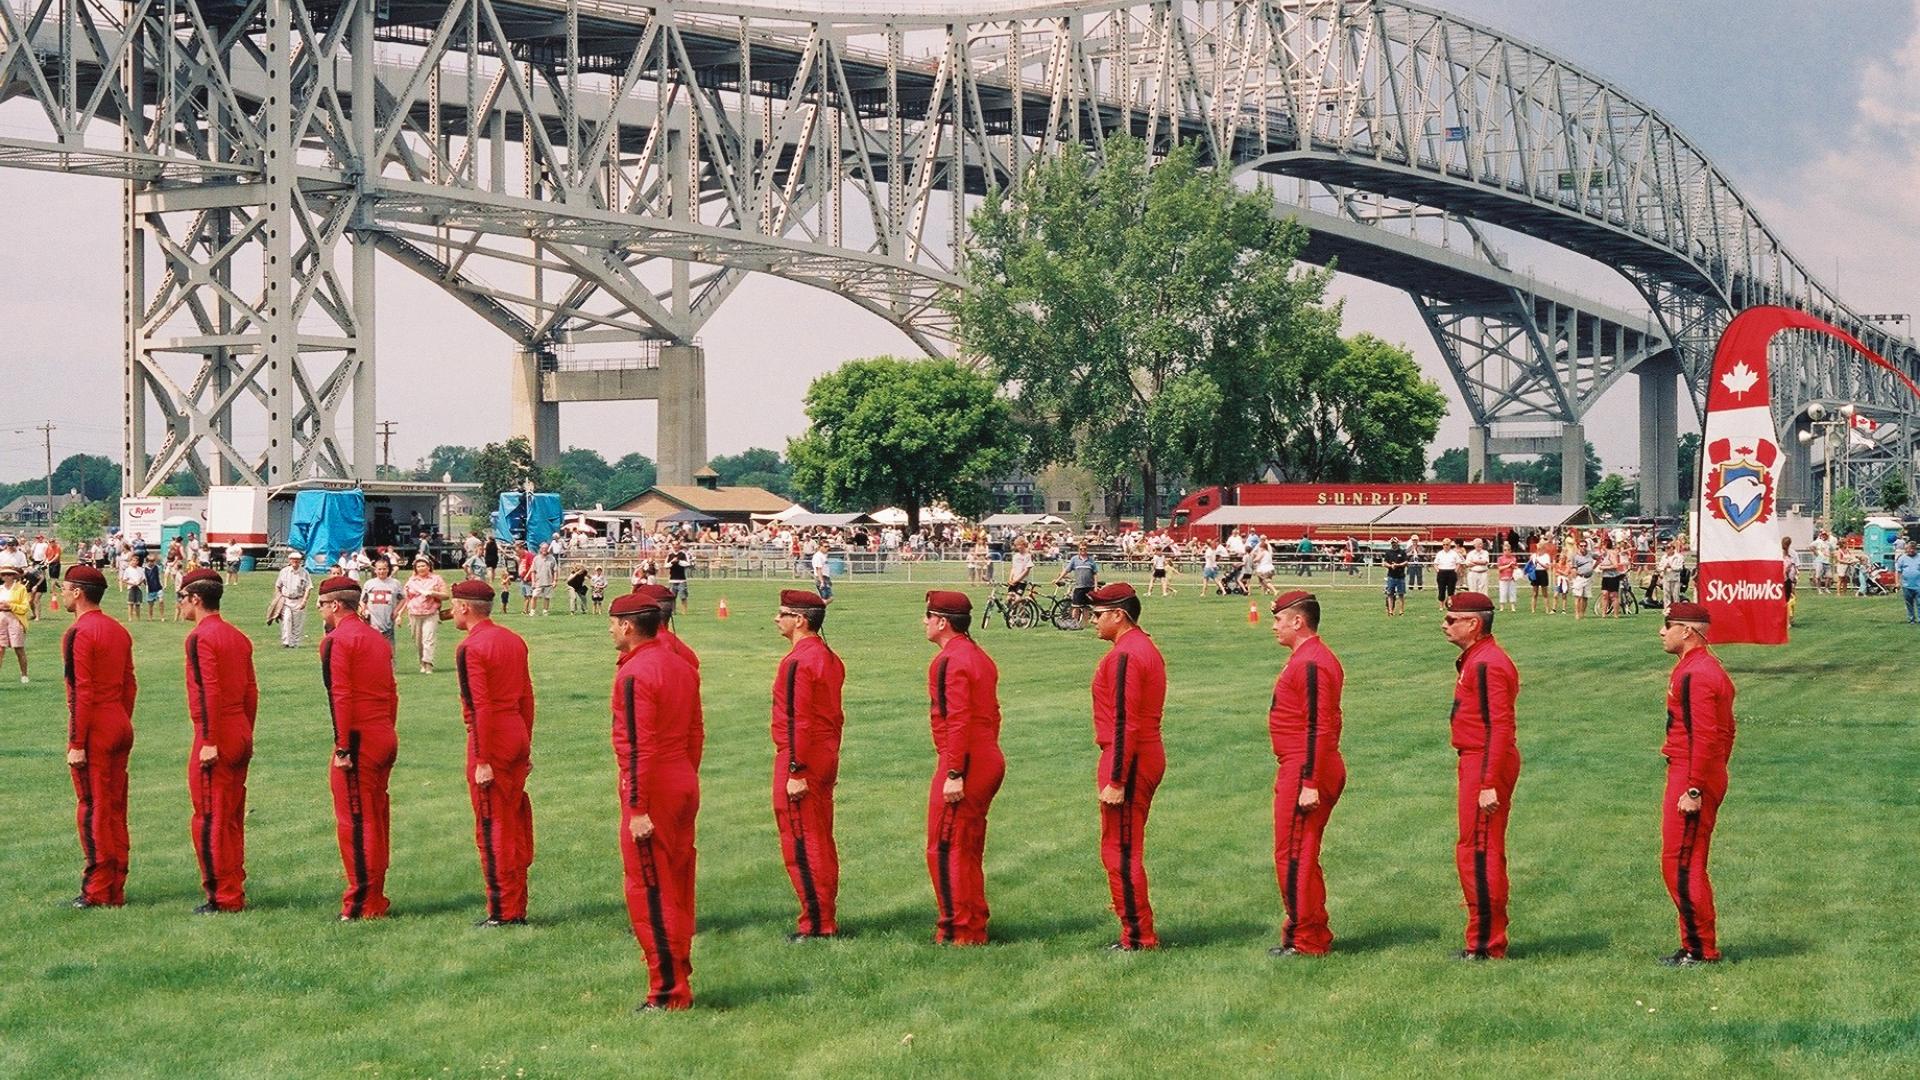 Group of men dressed in red jumpsuits standing in attention. The bridge stands tall in the background.